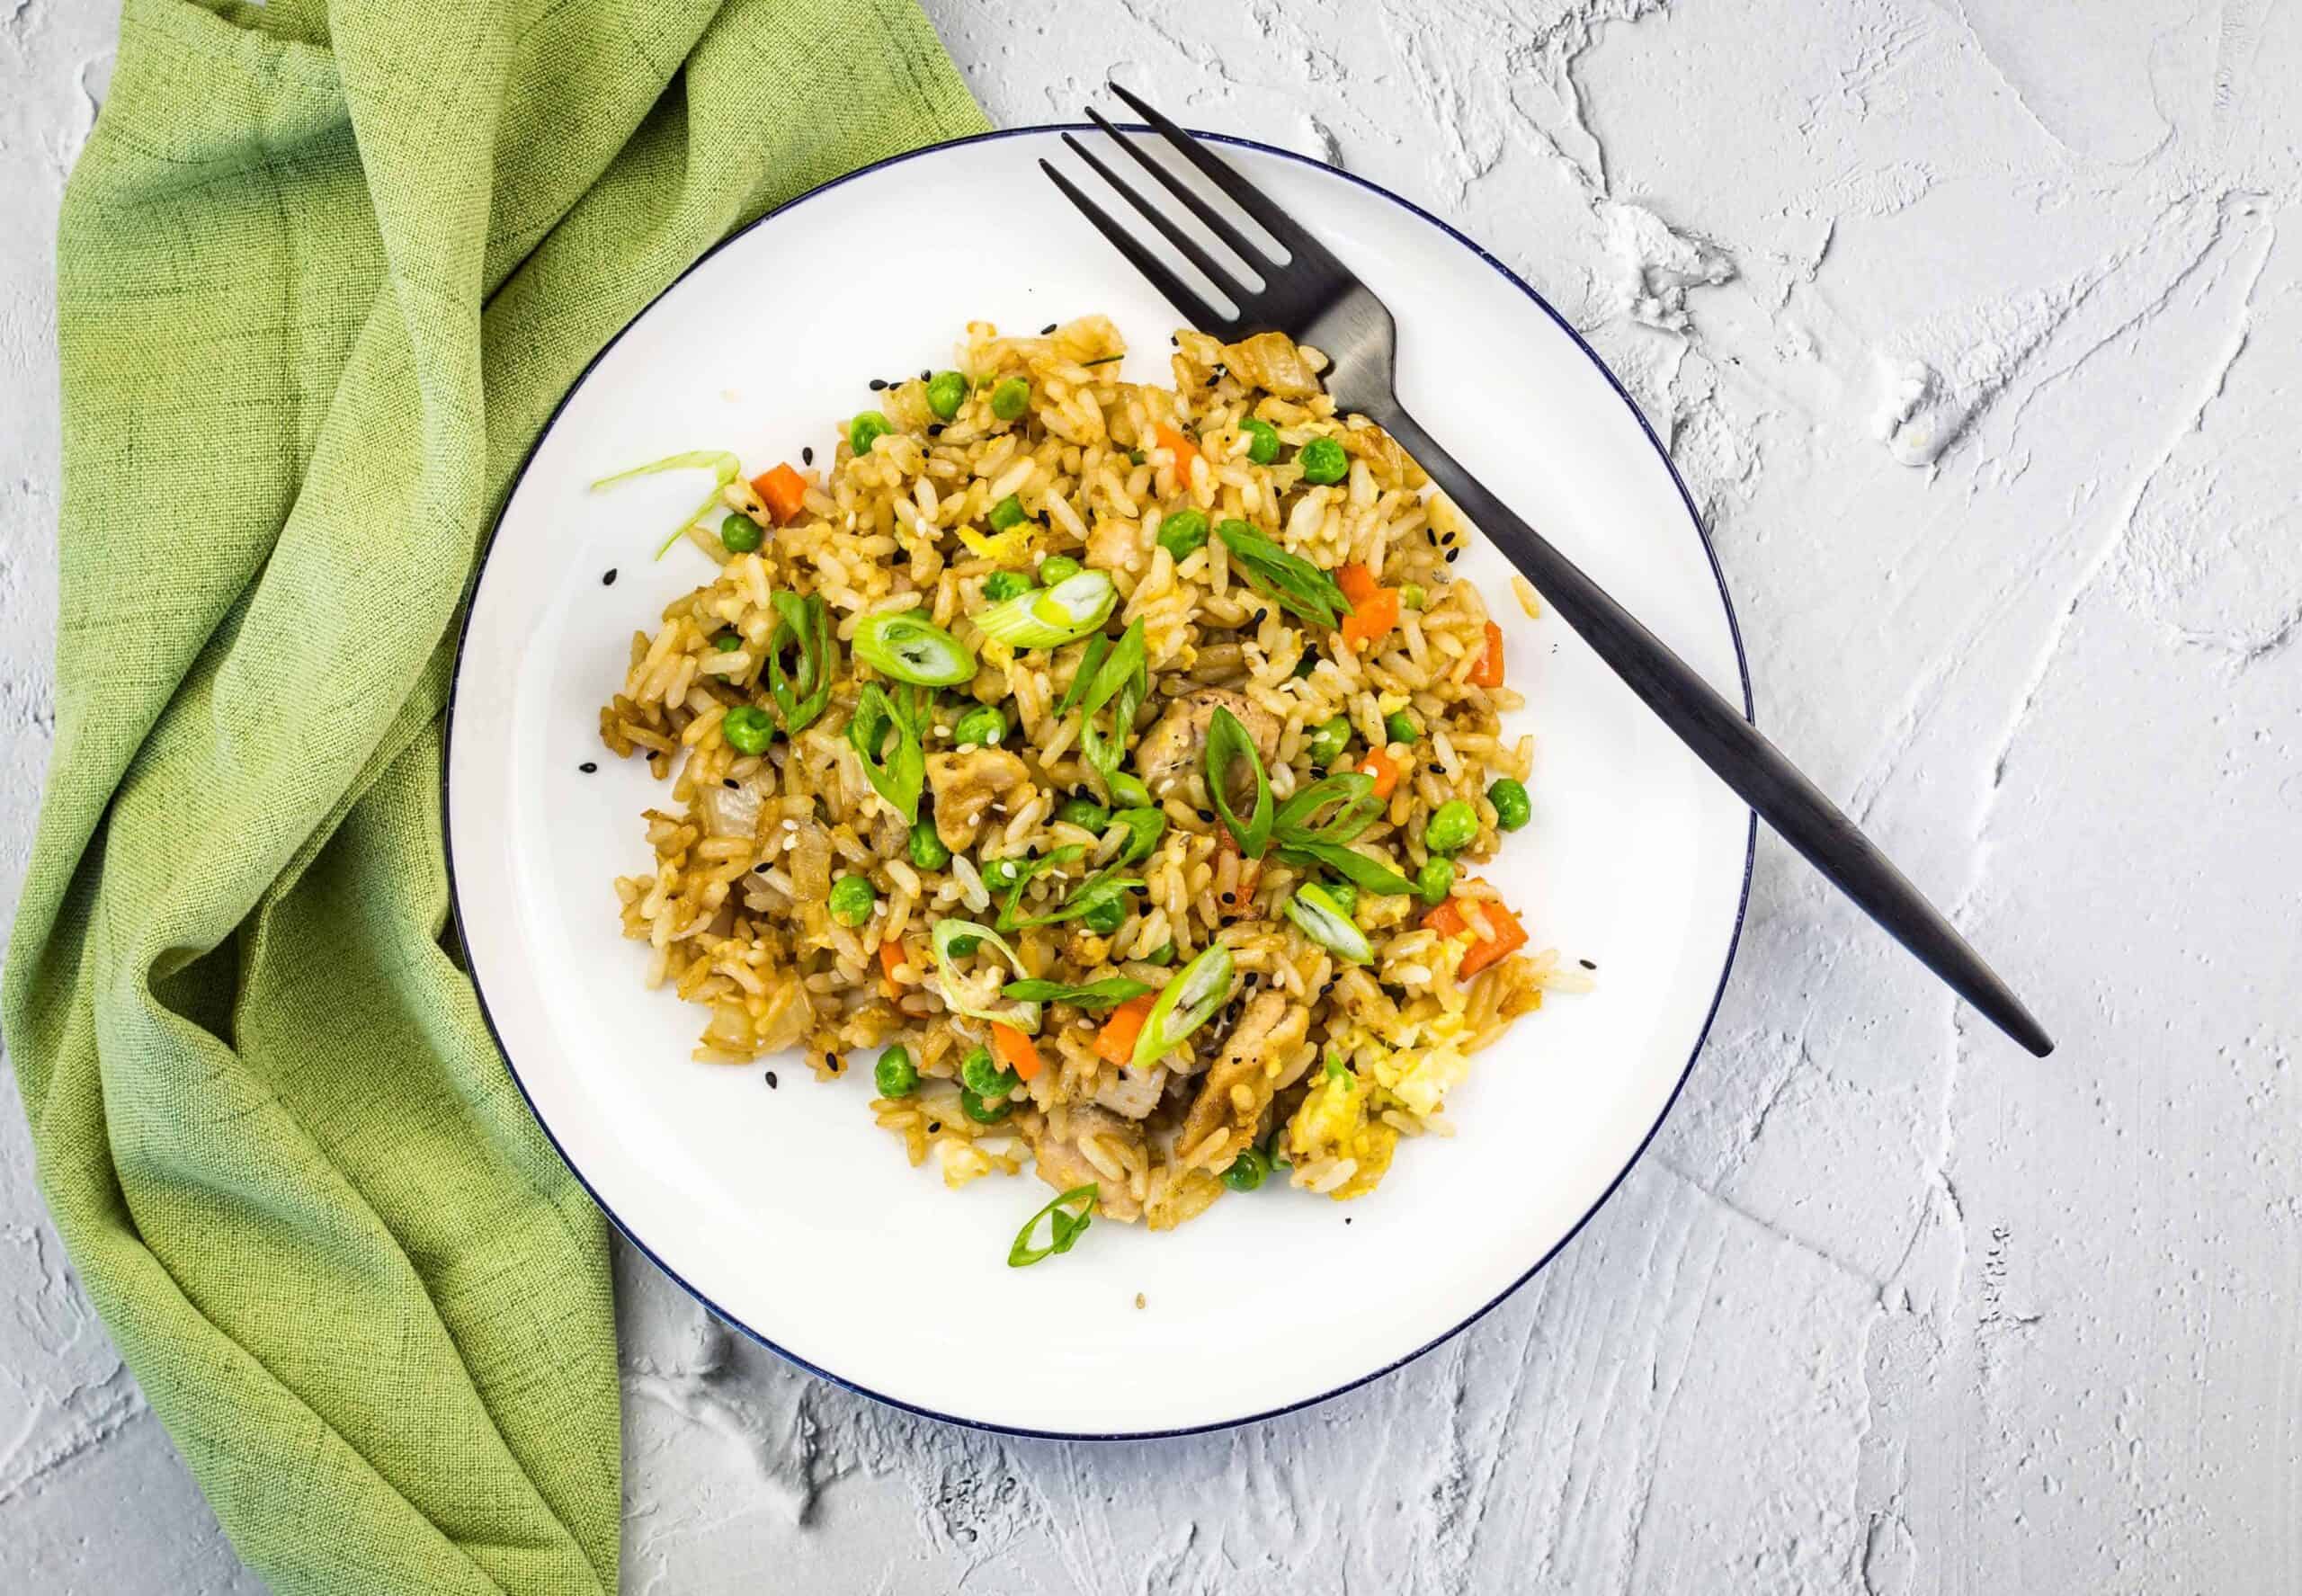 <p>Chicken Fried Rice is the ultimate no-stress dinner that everyone loves. It’s quick, it’s easy, and it’s a crowd-pleaser. Perfect for using up leftovers and getting dinner on the table fast, this dish means you’ll spend less time cooking and more time enjoying your evening.<br><strong>Get the Recipe: </strong><a href="https://cookwhatyoulove.com/chicken-fried-rice-on-a-blackstone-griddle/?utm_source=msn&utm_medium=page&utm_campaign=msn">Chicken Fried Rice</a></p>